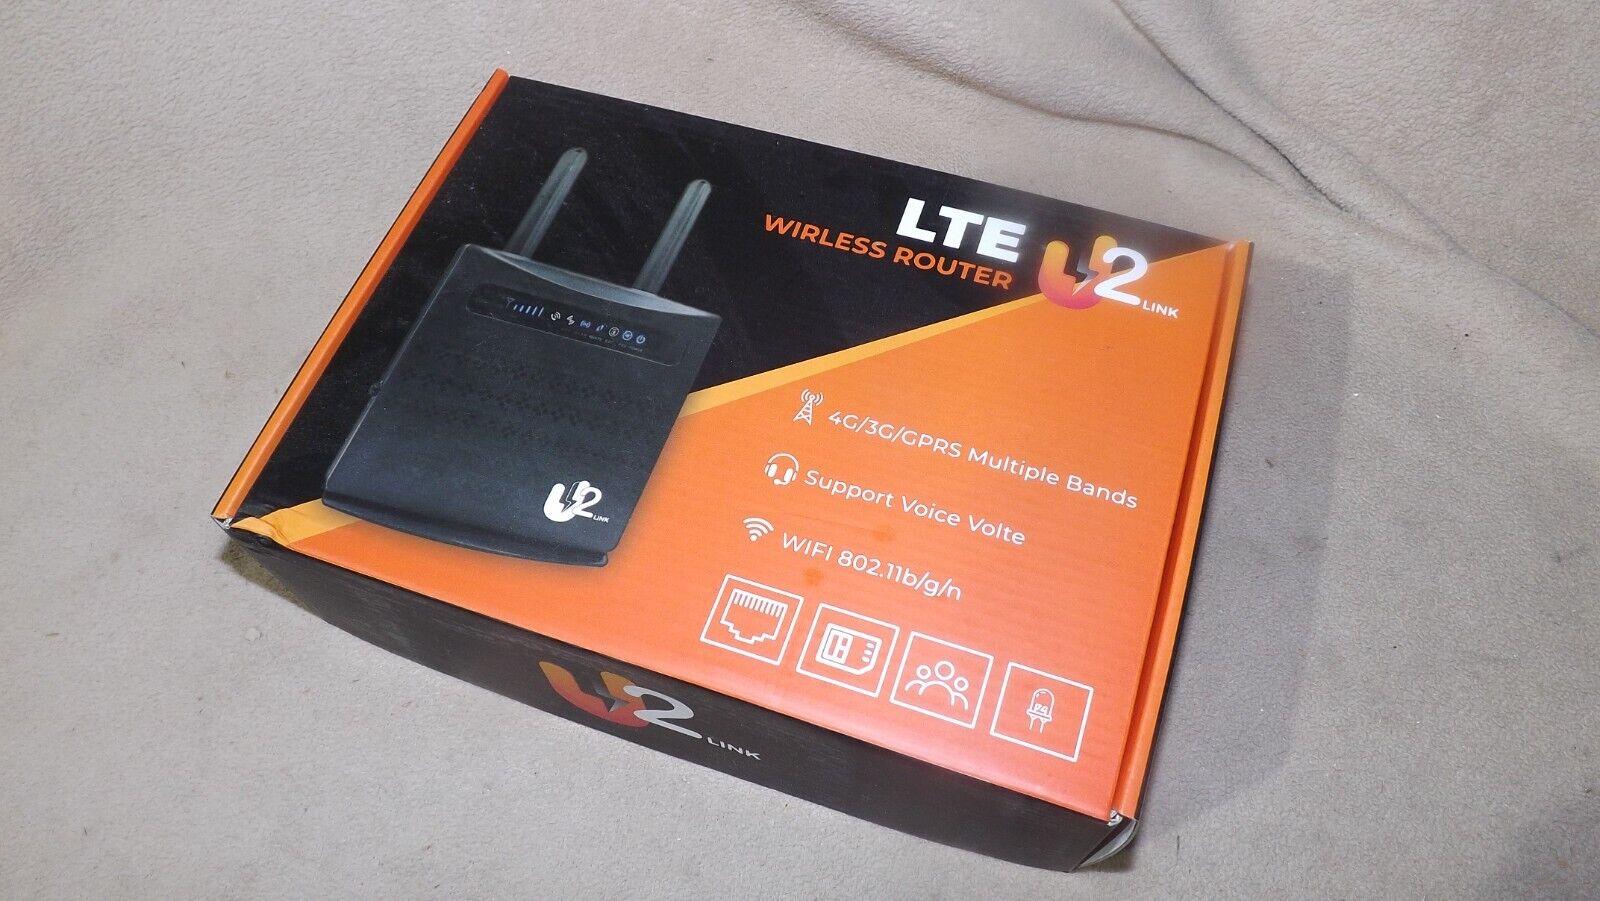 U2 Connect U2link 4G Wireless Router W/ SIM Slot. Available Now for $44.00